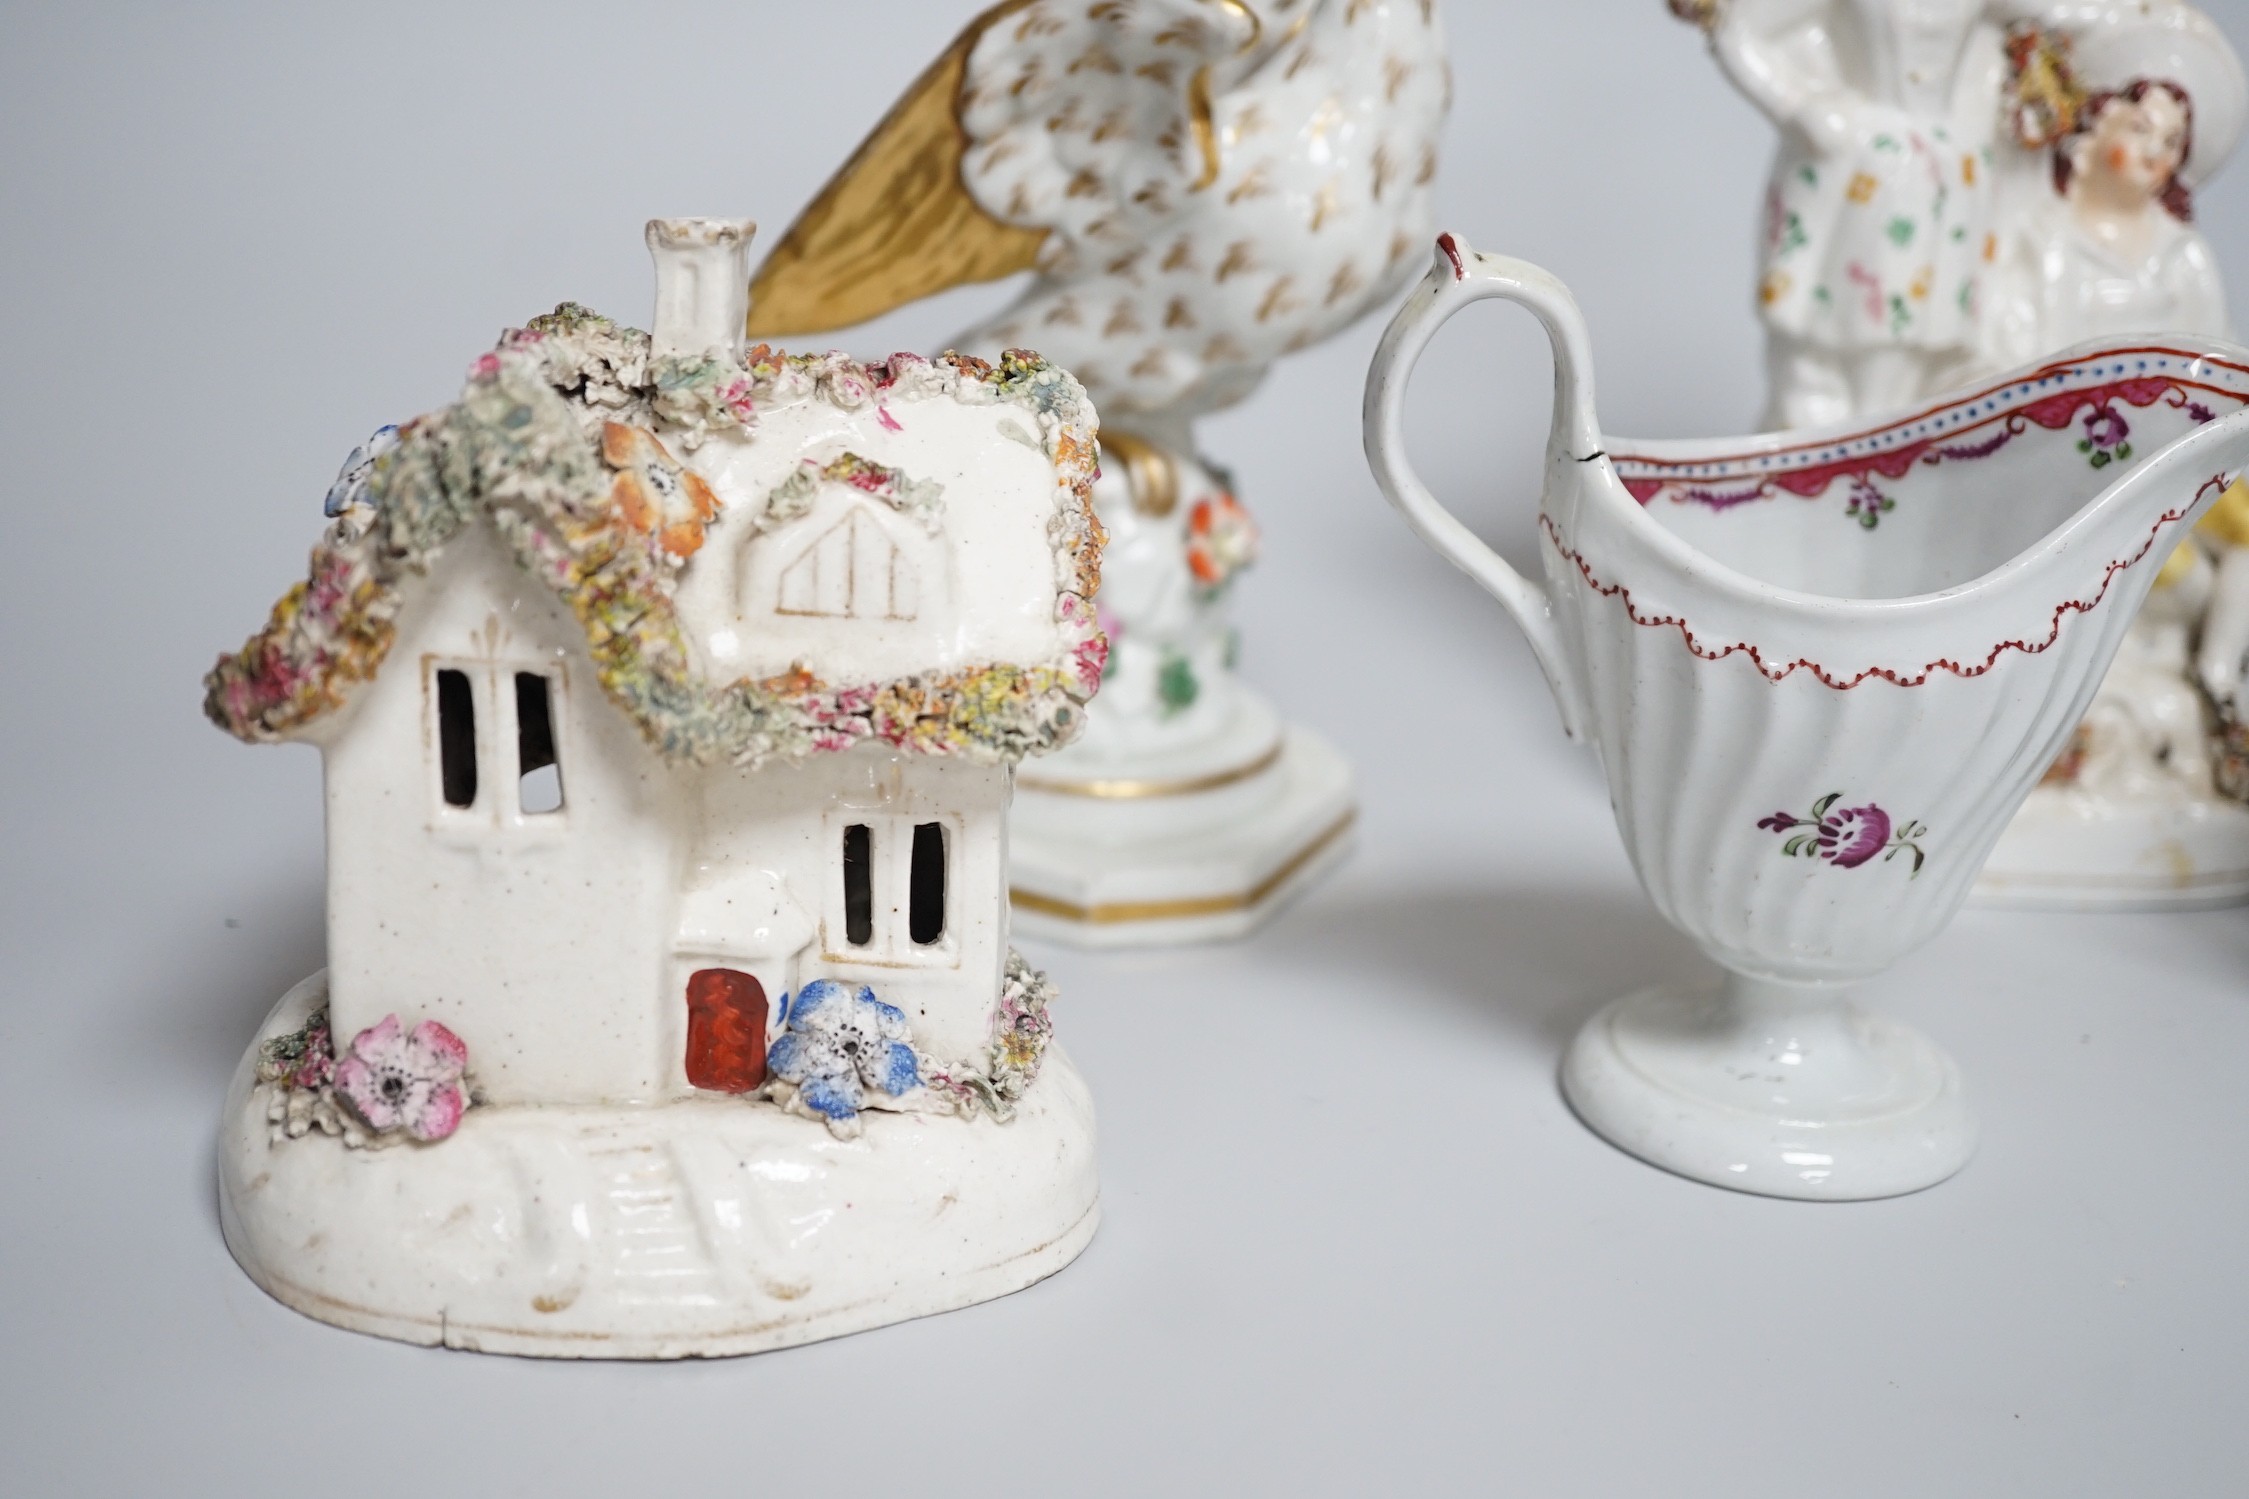 A Worcester milk jug, c.1780, a Newhall-type cream jug, c.1795, a Staffordshire porcelain model of an eagle, c.1830-40, 17cm high, and two Staffordshire porcellaneous models